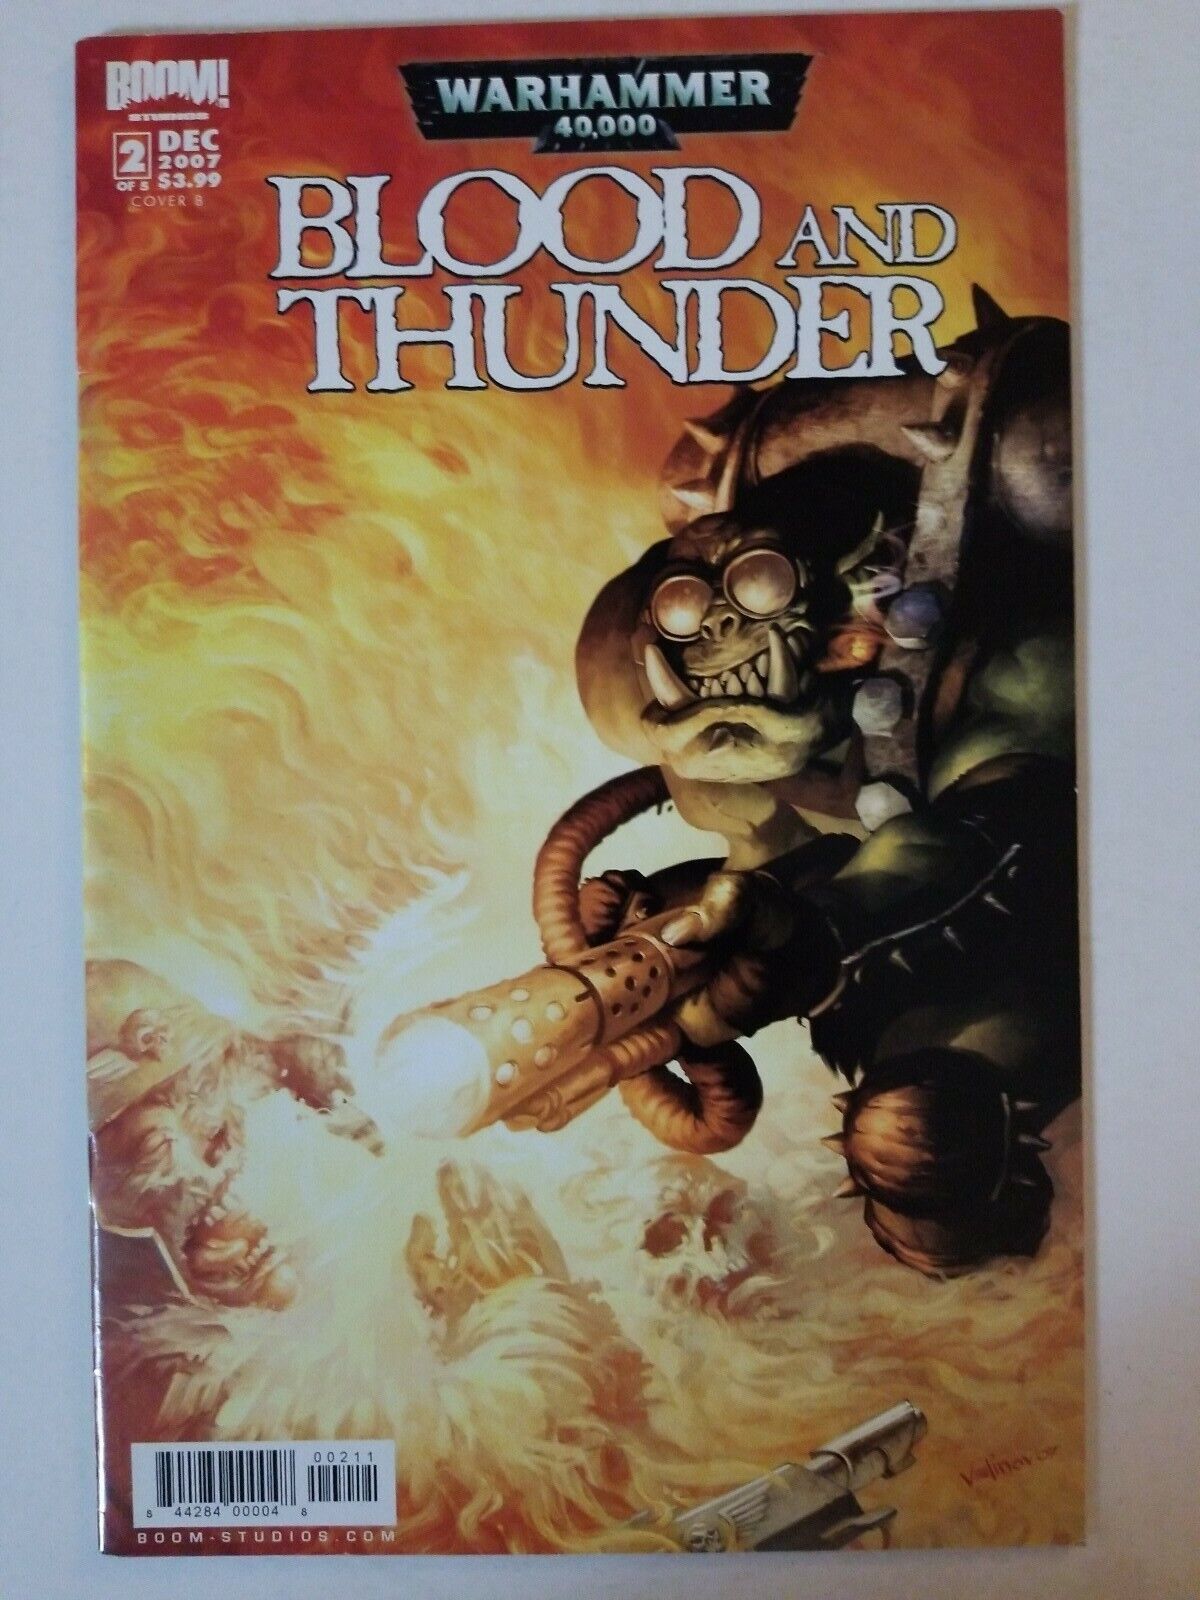 Warhammer 40000 Blood and Thunder (2007) #2 - Fine - 40k, Cover B